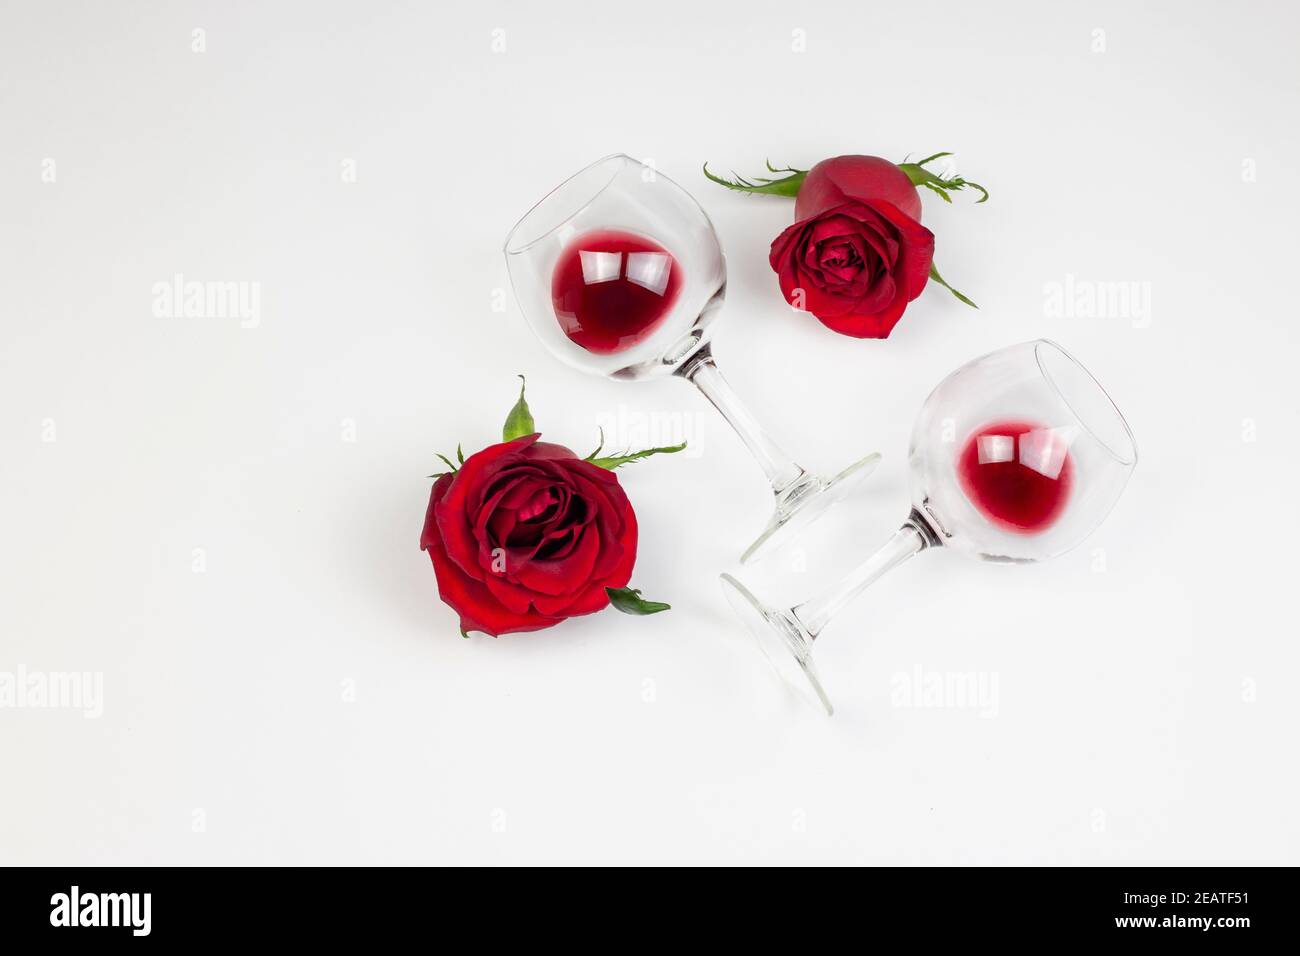 https://c8.alamy.com/comp/2EATF51/red-roses-and-wine-glasses-with-red-wine-on-white-background-holidays-and-valentins-day-romantic-flat-lay-top-view-concept-2EATF51.jpg